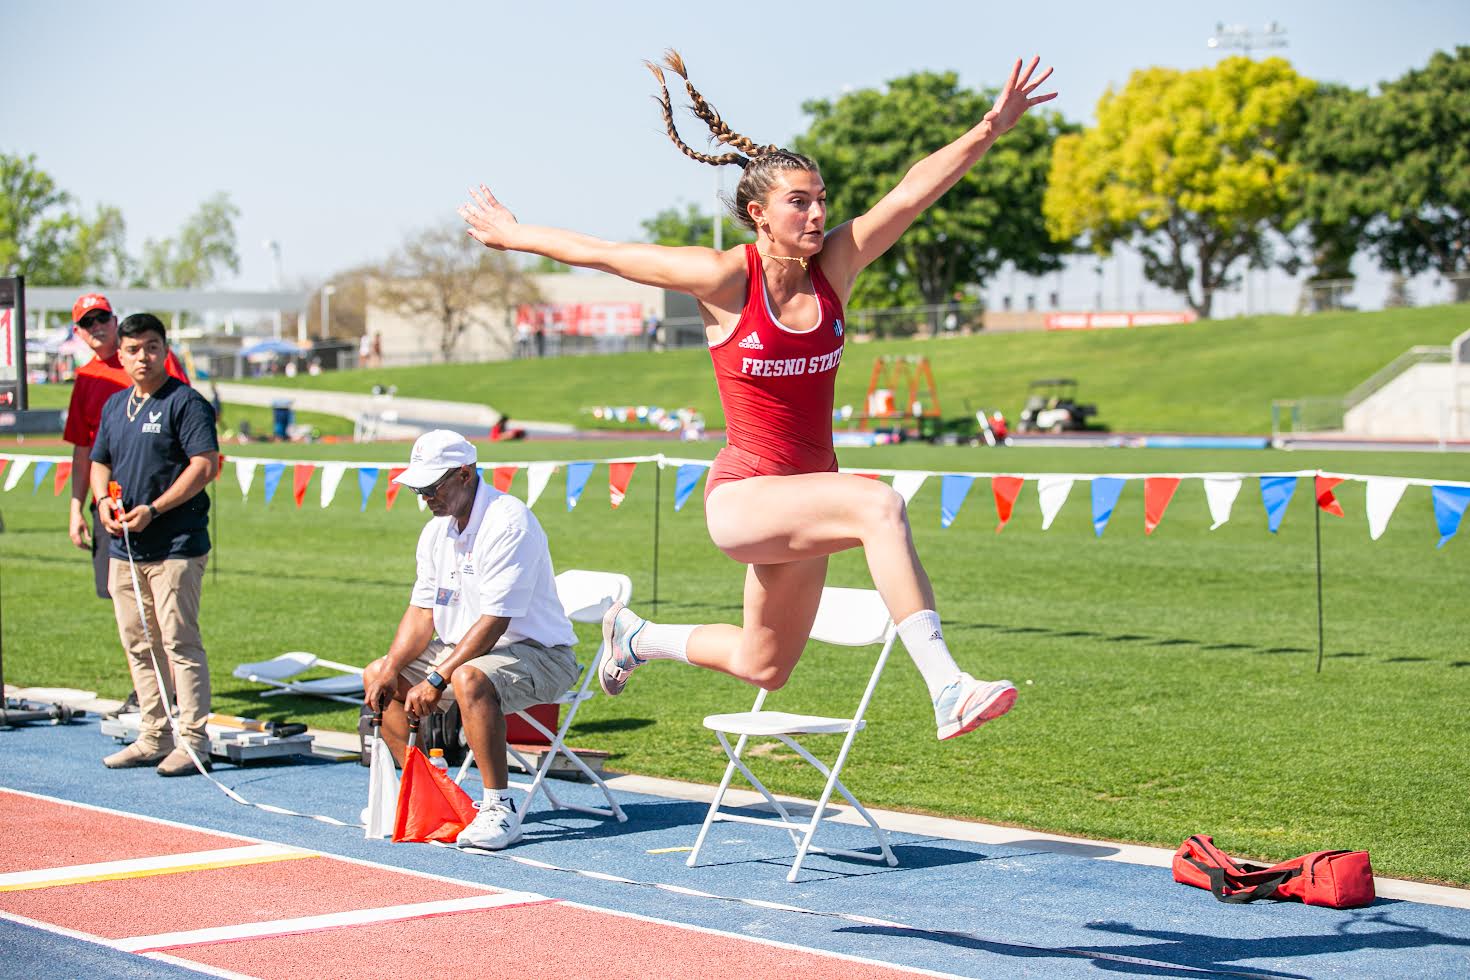 Rachela+Pace+set+a+new+personal+record+in+triple+jump+at+the+West+Coast+Relays+April+1%2C+2022.+%28Photo+courtesy+of+Fresno+State+Athletics%29